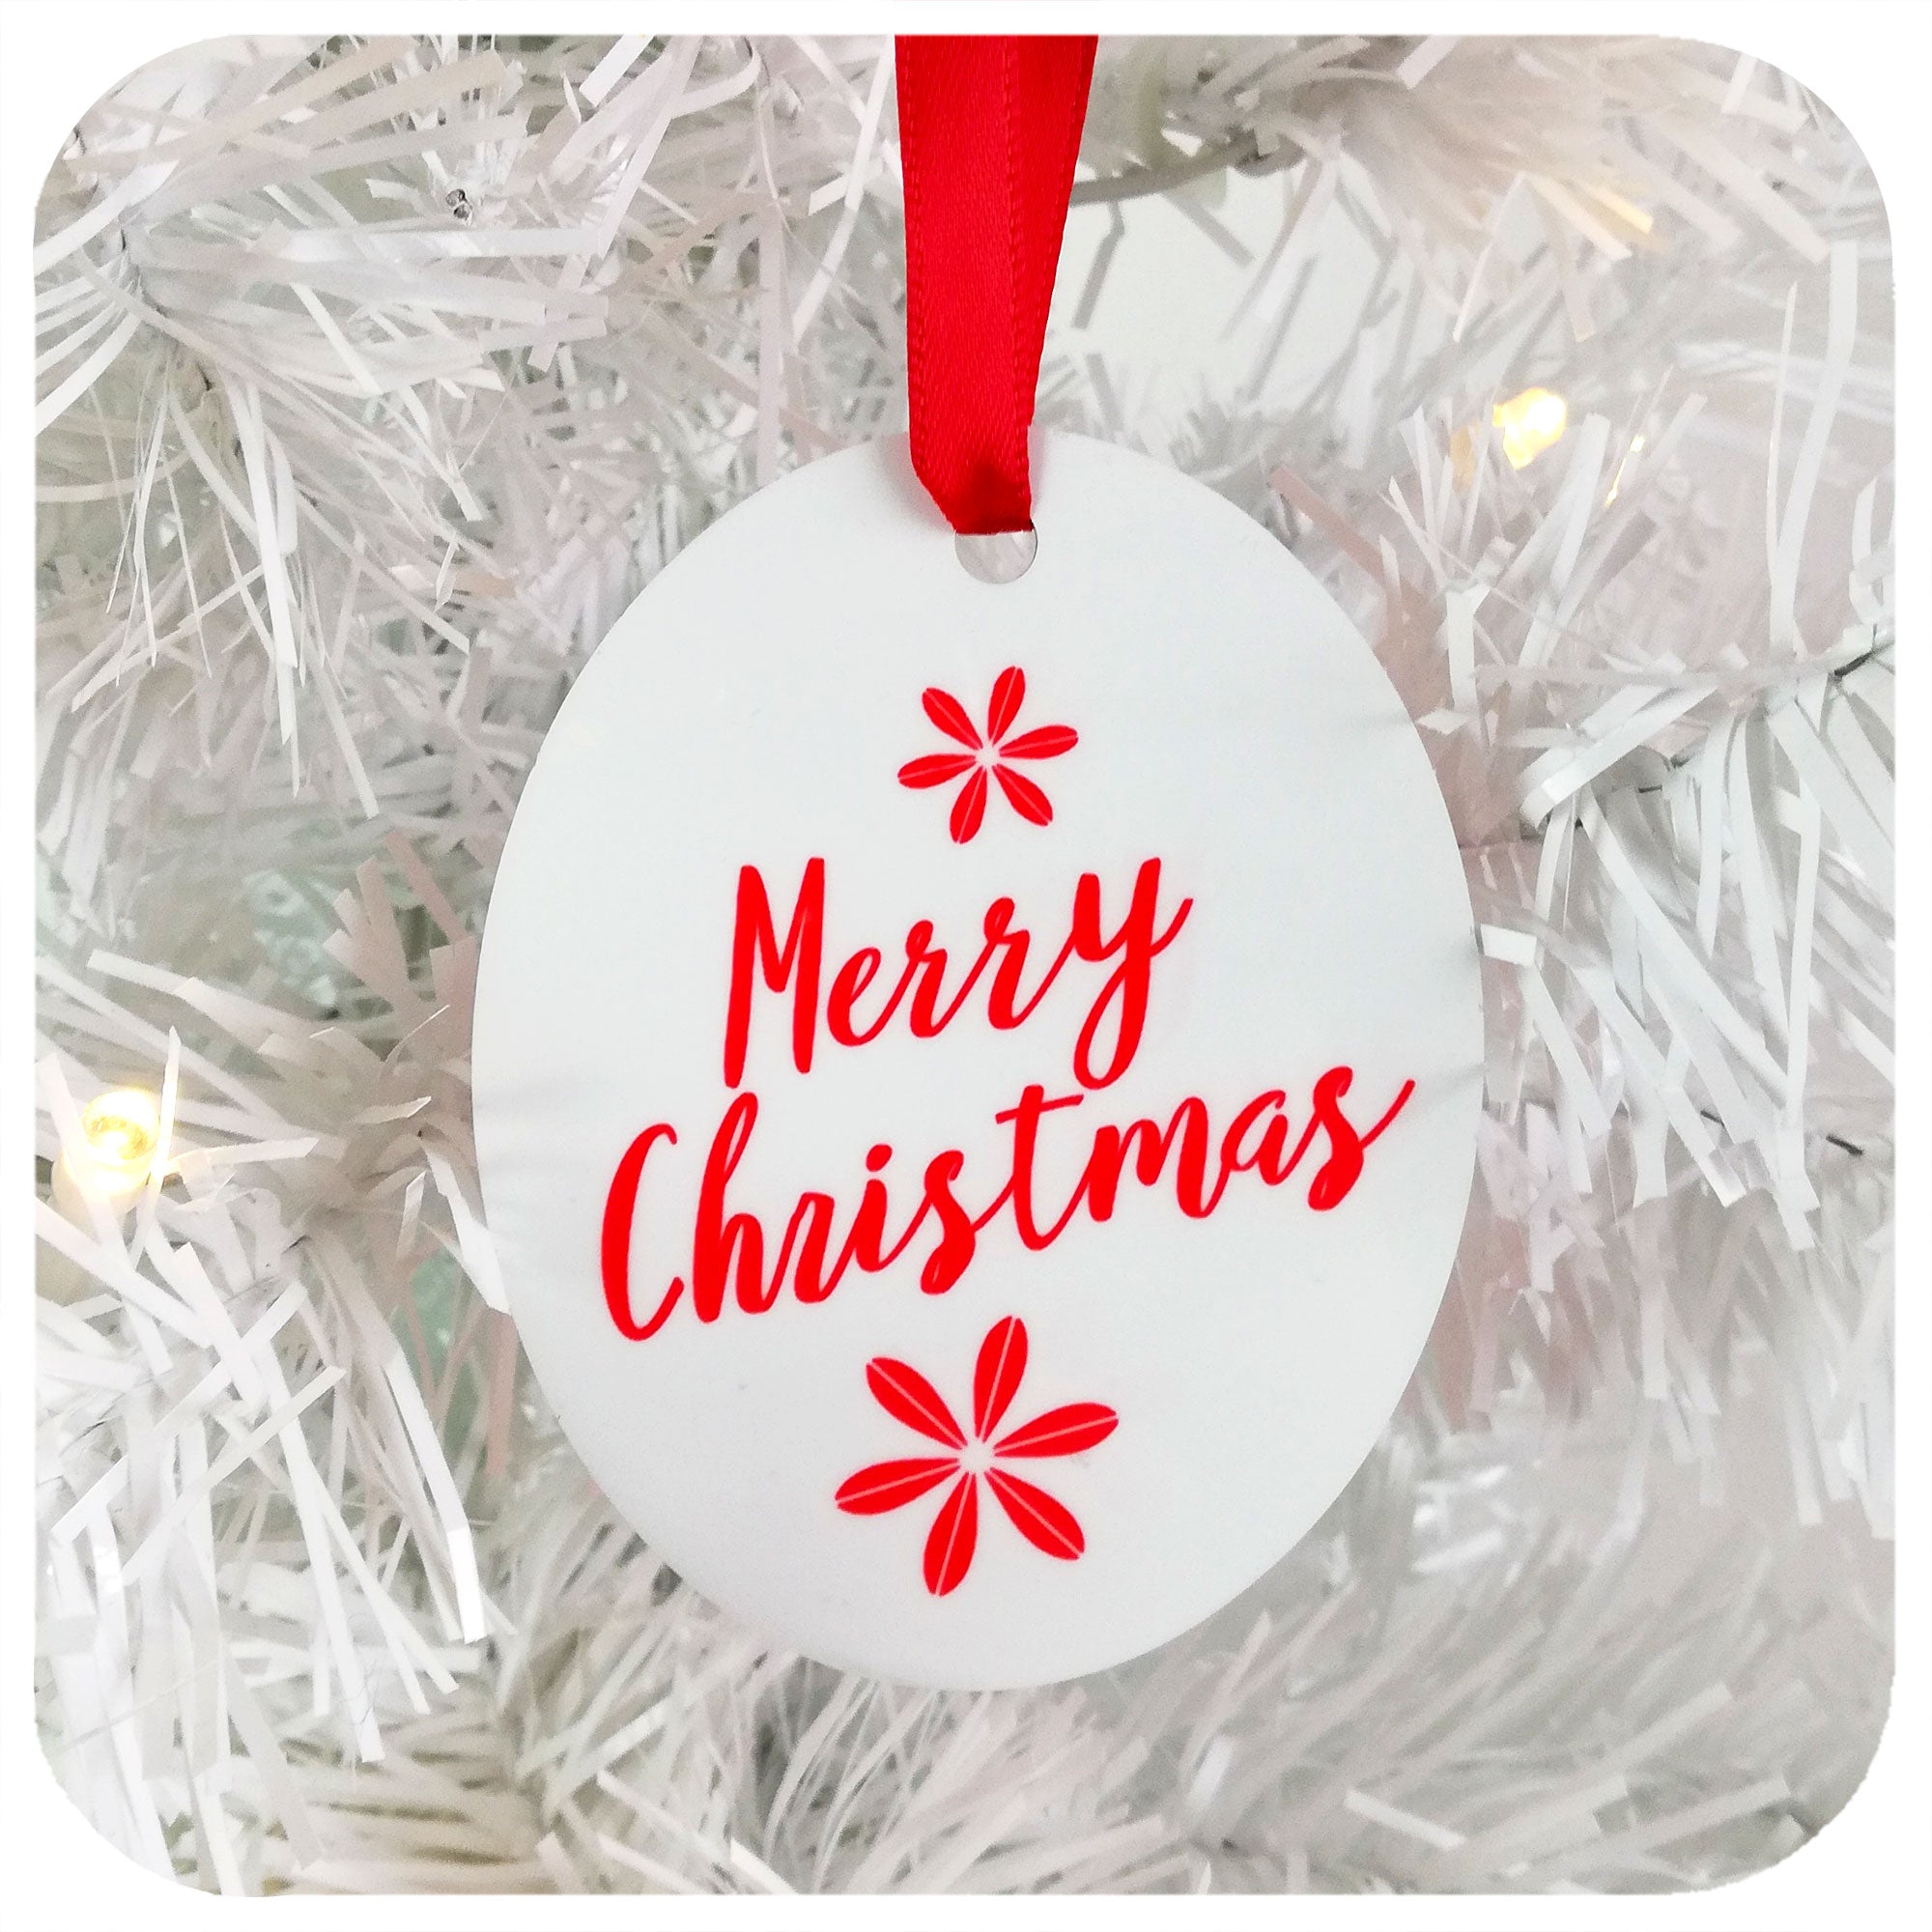 Christmas Tree Decoration saying Merry Christmas in red & white, hanging by red ribbon on a white Christmas tree | The Inkabilly Emporium